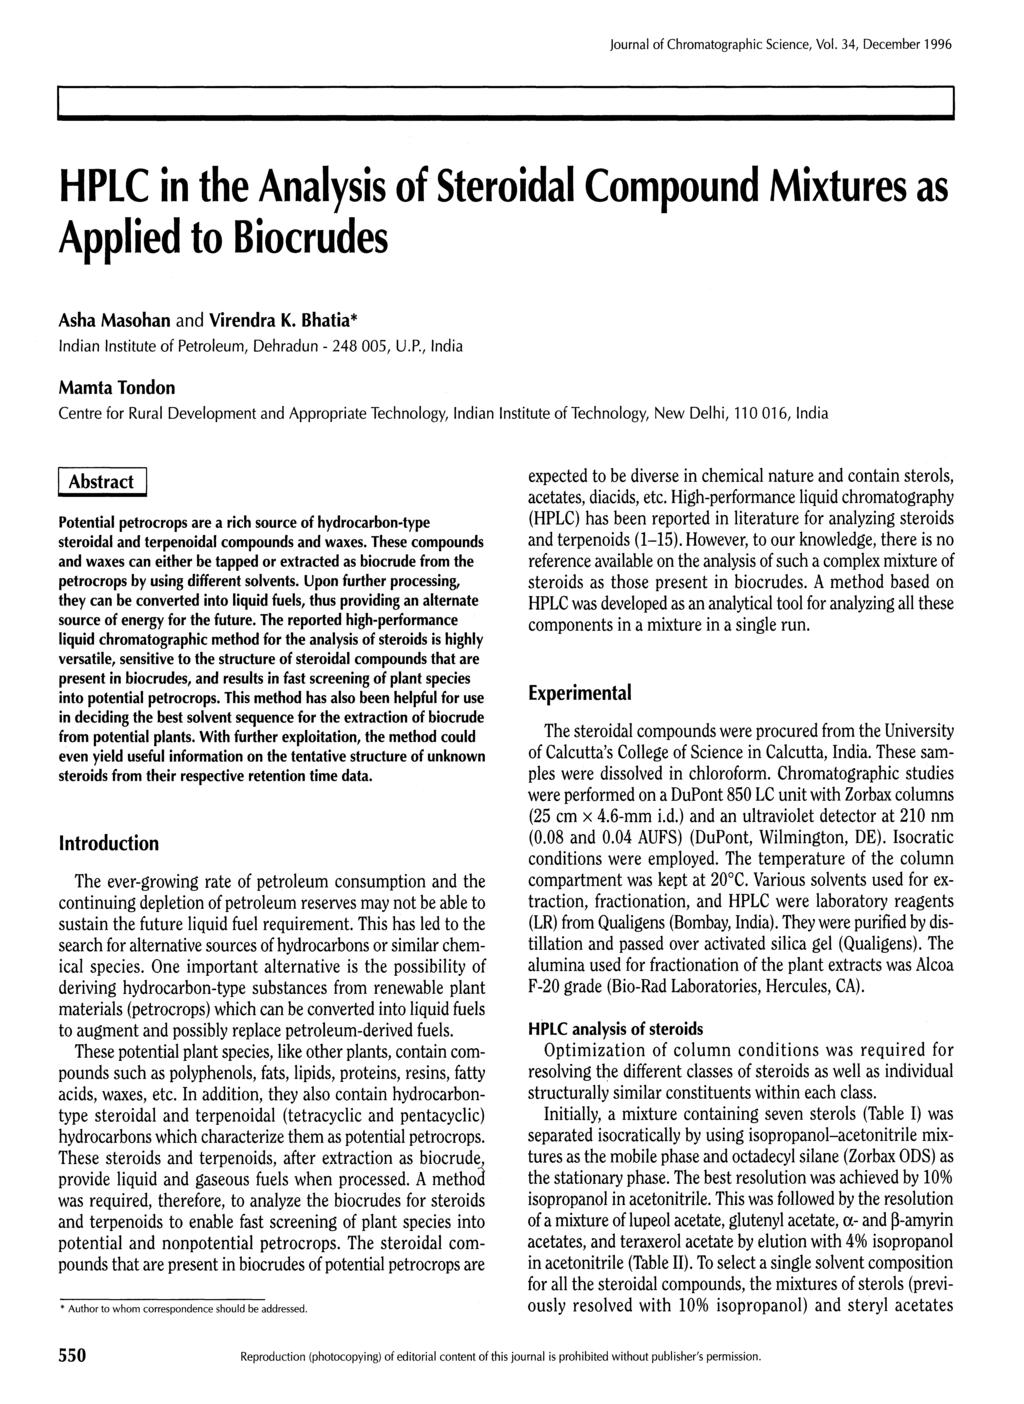 HPLC in the Analysis of Steroidal Compound Mixtures as Applied to Biocrudes Asha Masohan and Virendra K. Bhatia* Indian Institute of Petroleum, Dehradun - 248 005, U.P., India Mamta Tondon Centre for